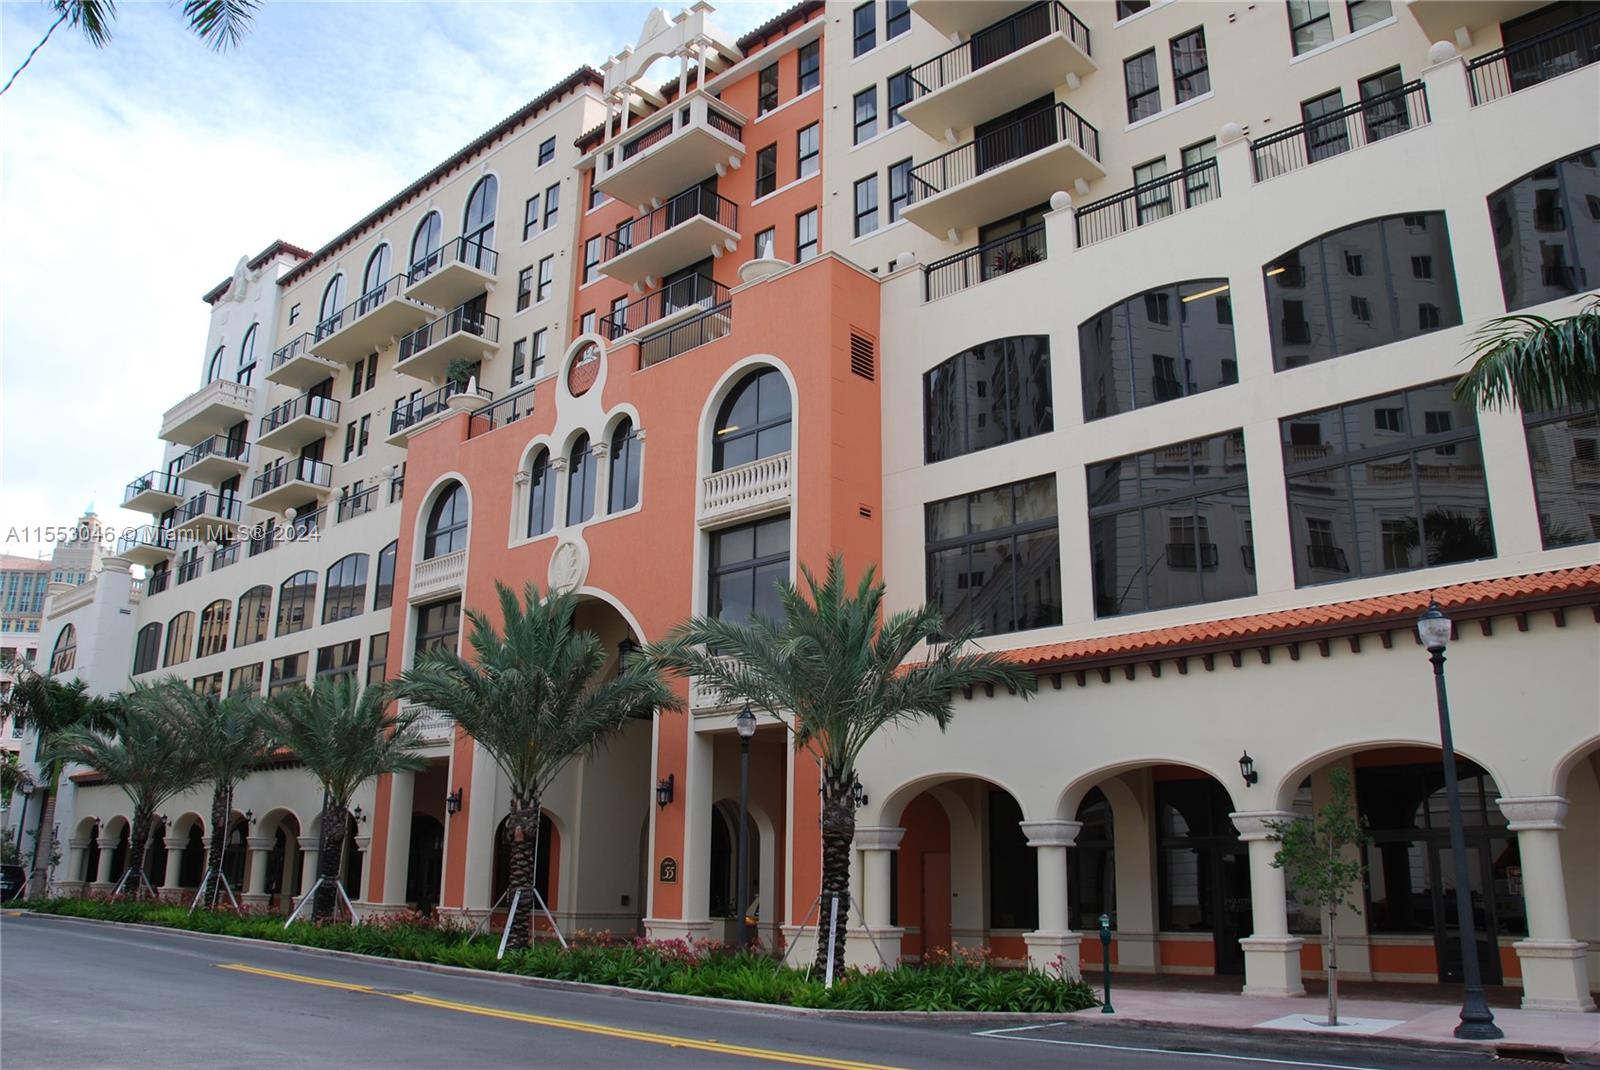 Beautiful Penthouse unit at 55 Merrick. Large one bedroom unit, plus den. Unit overlooks the pool and courtyard. 10 ft ceilings. Unit is vacant and easy to show. Located in the heart of the Coral Gables Business District. Walking distance to restaurants and shopping.